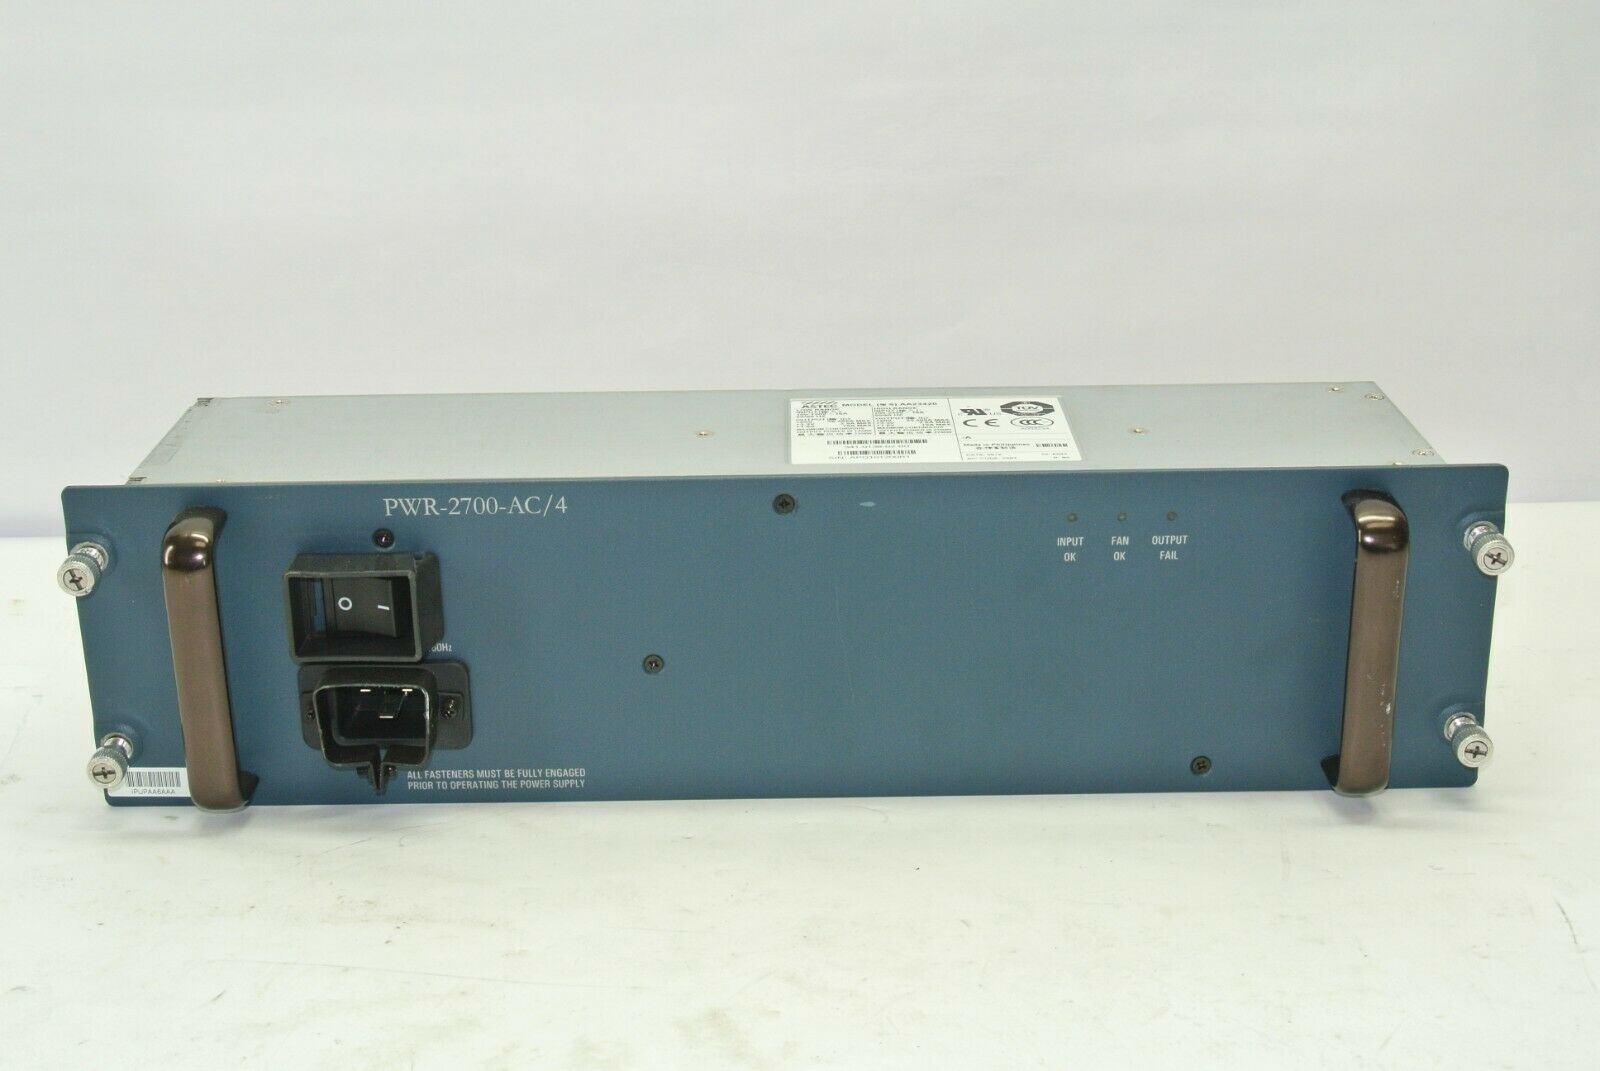 AA23420 341 0138 02 pwr 2700 ac pwr 2700 ac cisco 2700 watts ac power supply for catalyst 7604 6504 e switch